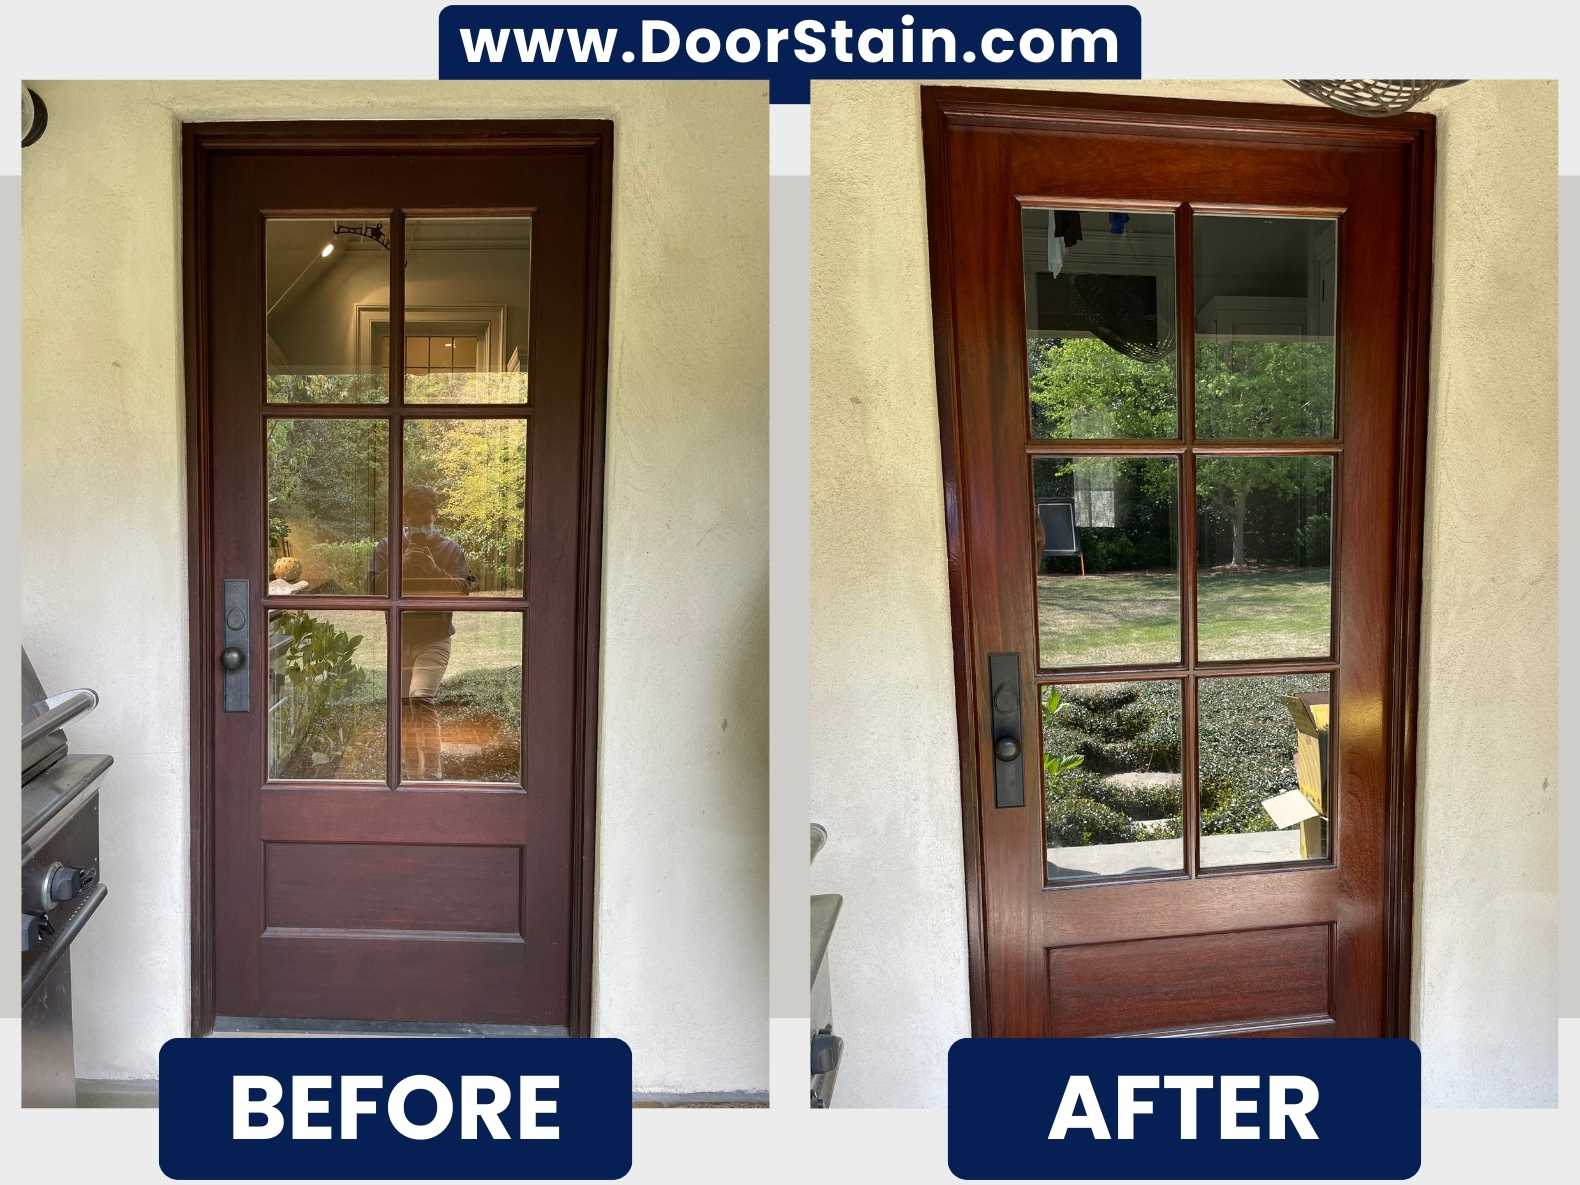 Step-by-Step Guide: How to Maintain a Wood Door